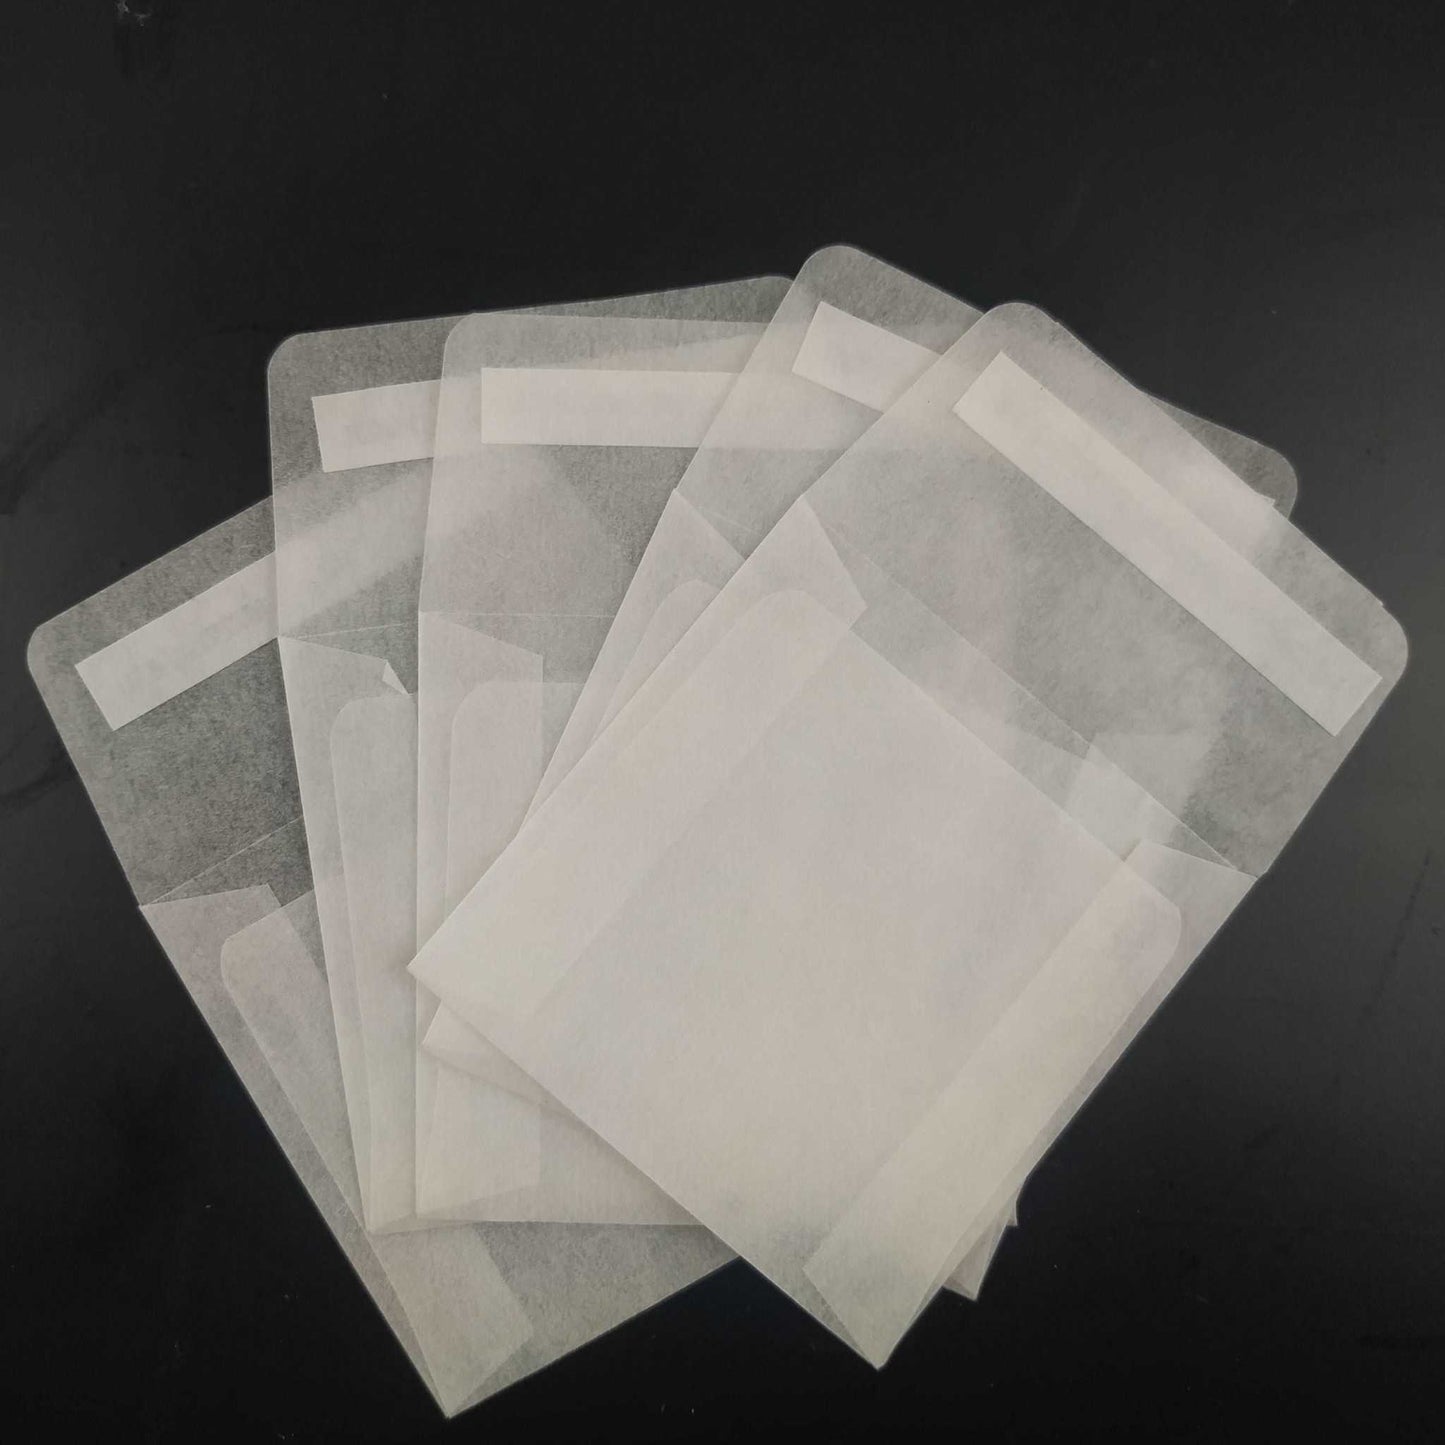 Variety of biodegradable glassine envelopes with peel and seal closure, ideal for wedding confetti, wax melts, and eco-conscious packaging needs